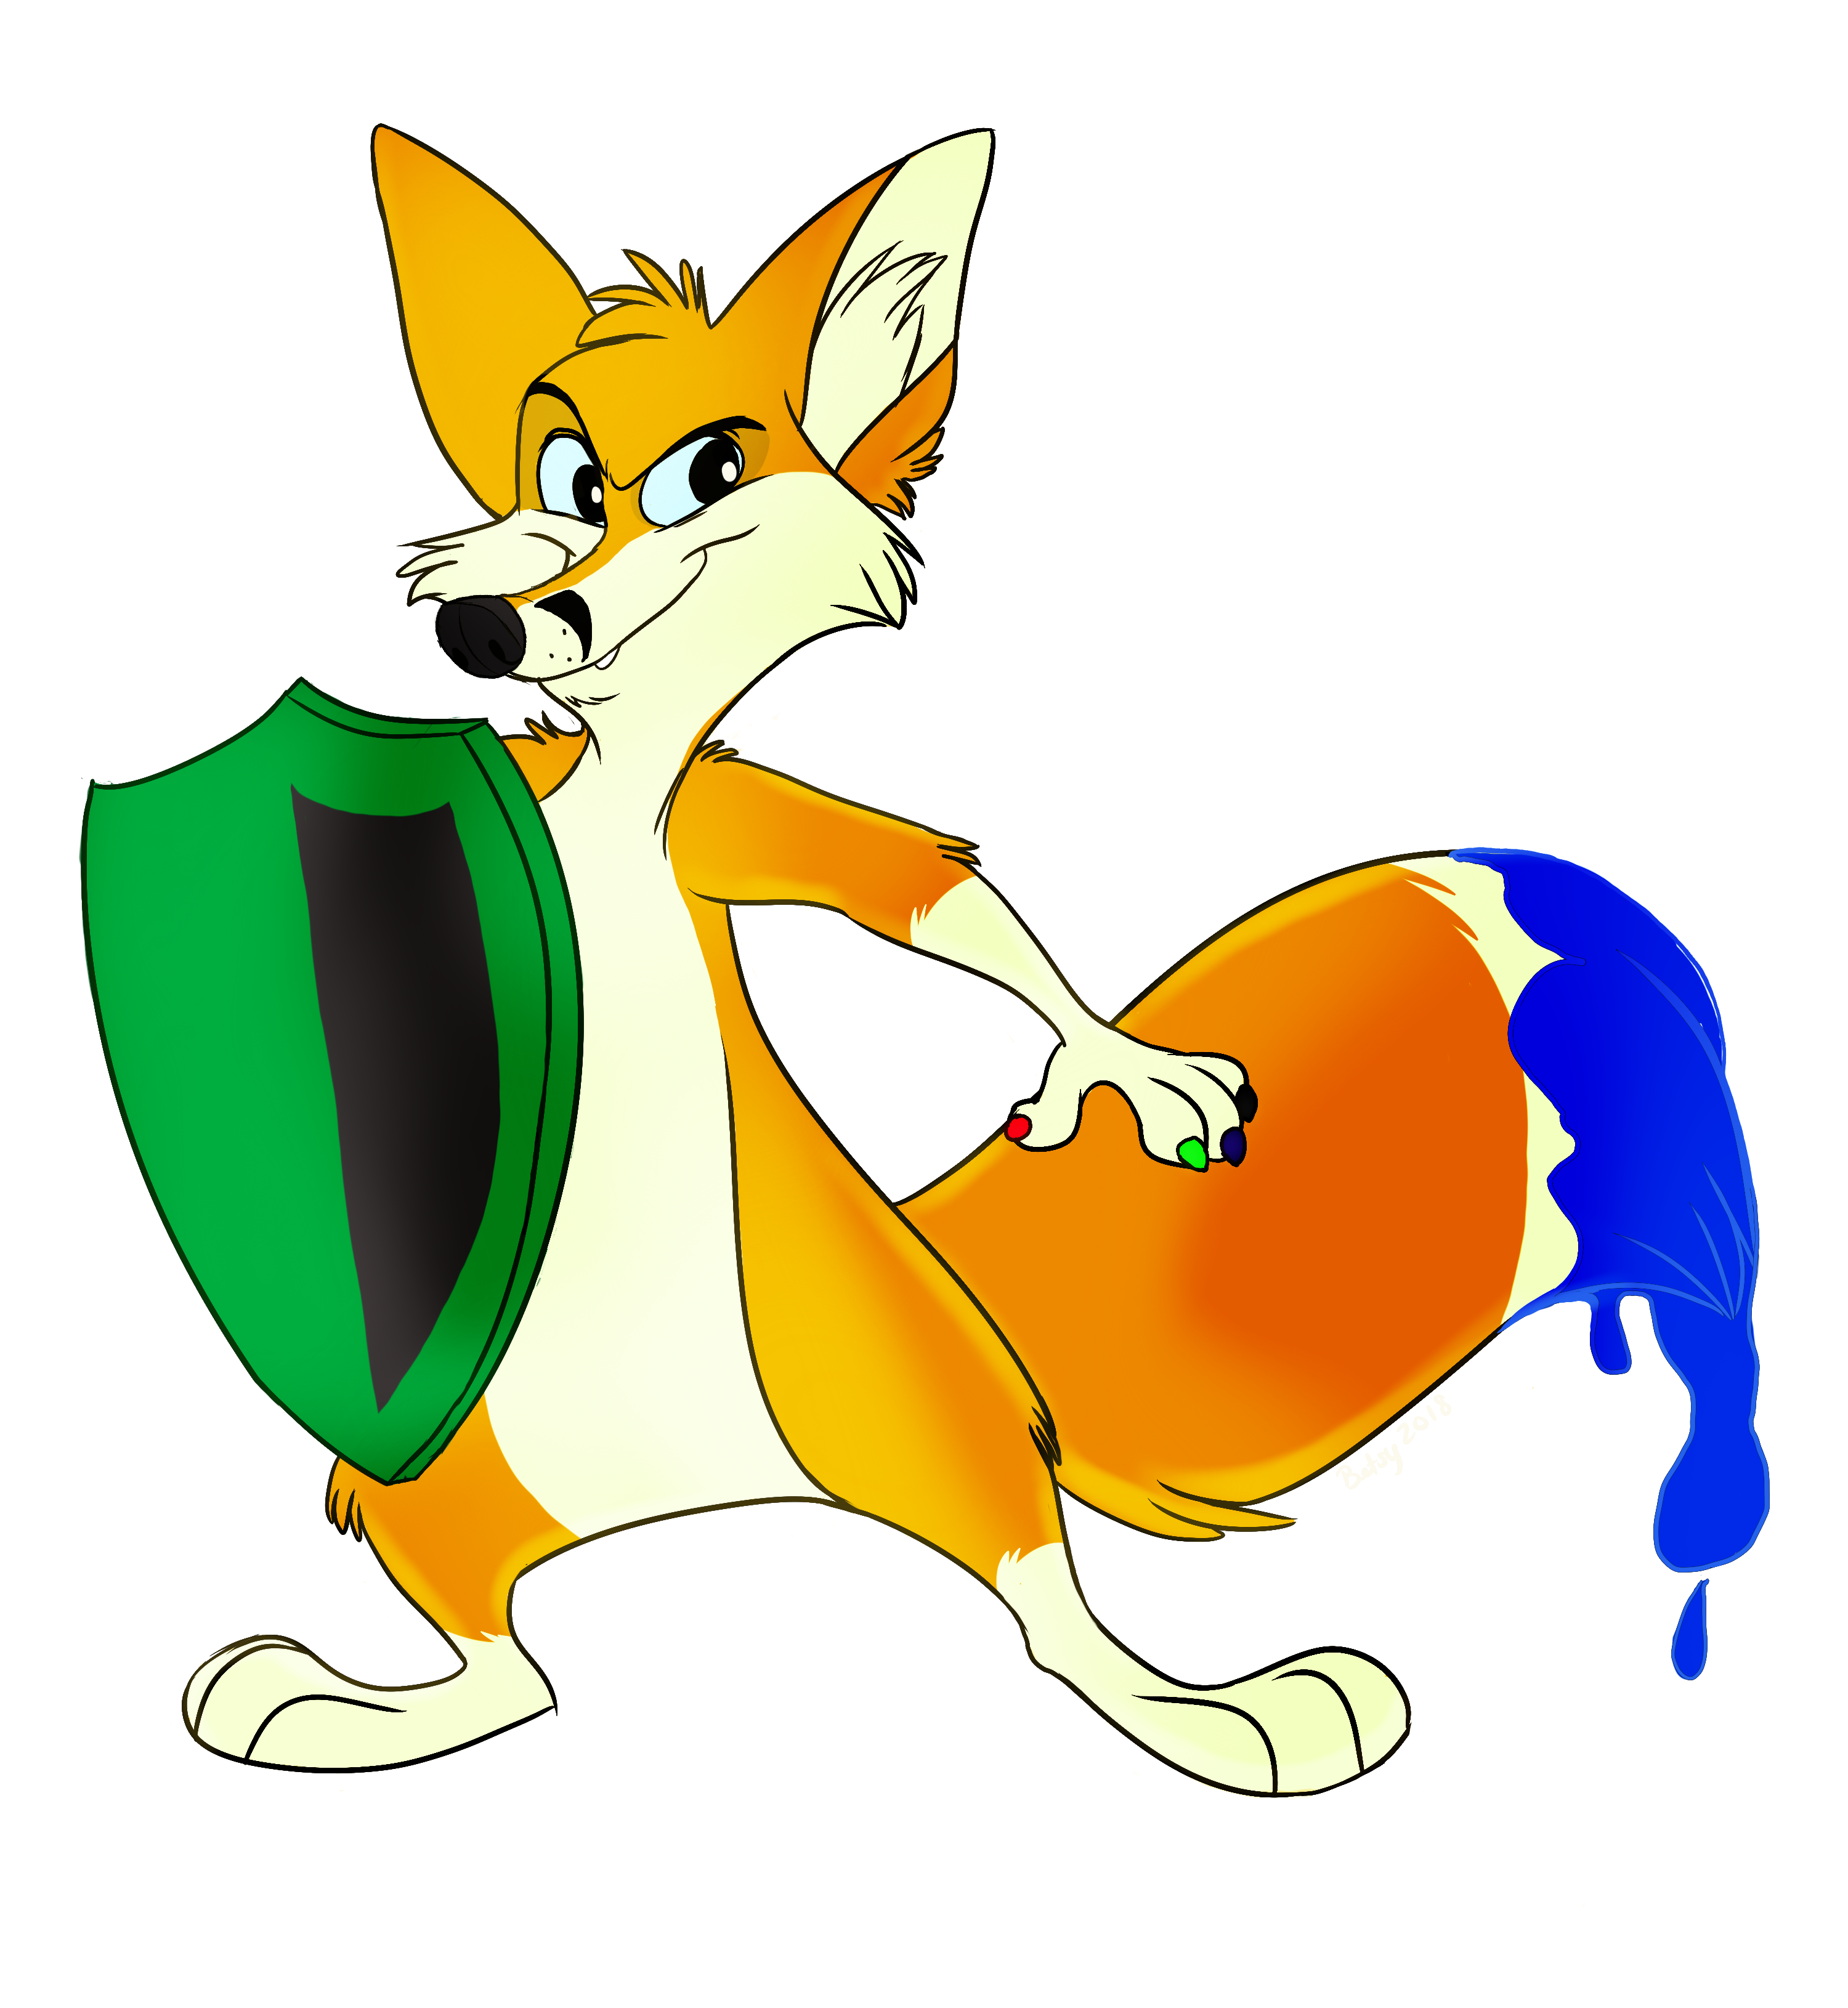 Vulpy, the Artconomy.com mascot, holding a shield to represent art escrow payments